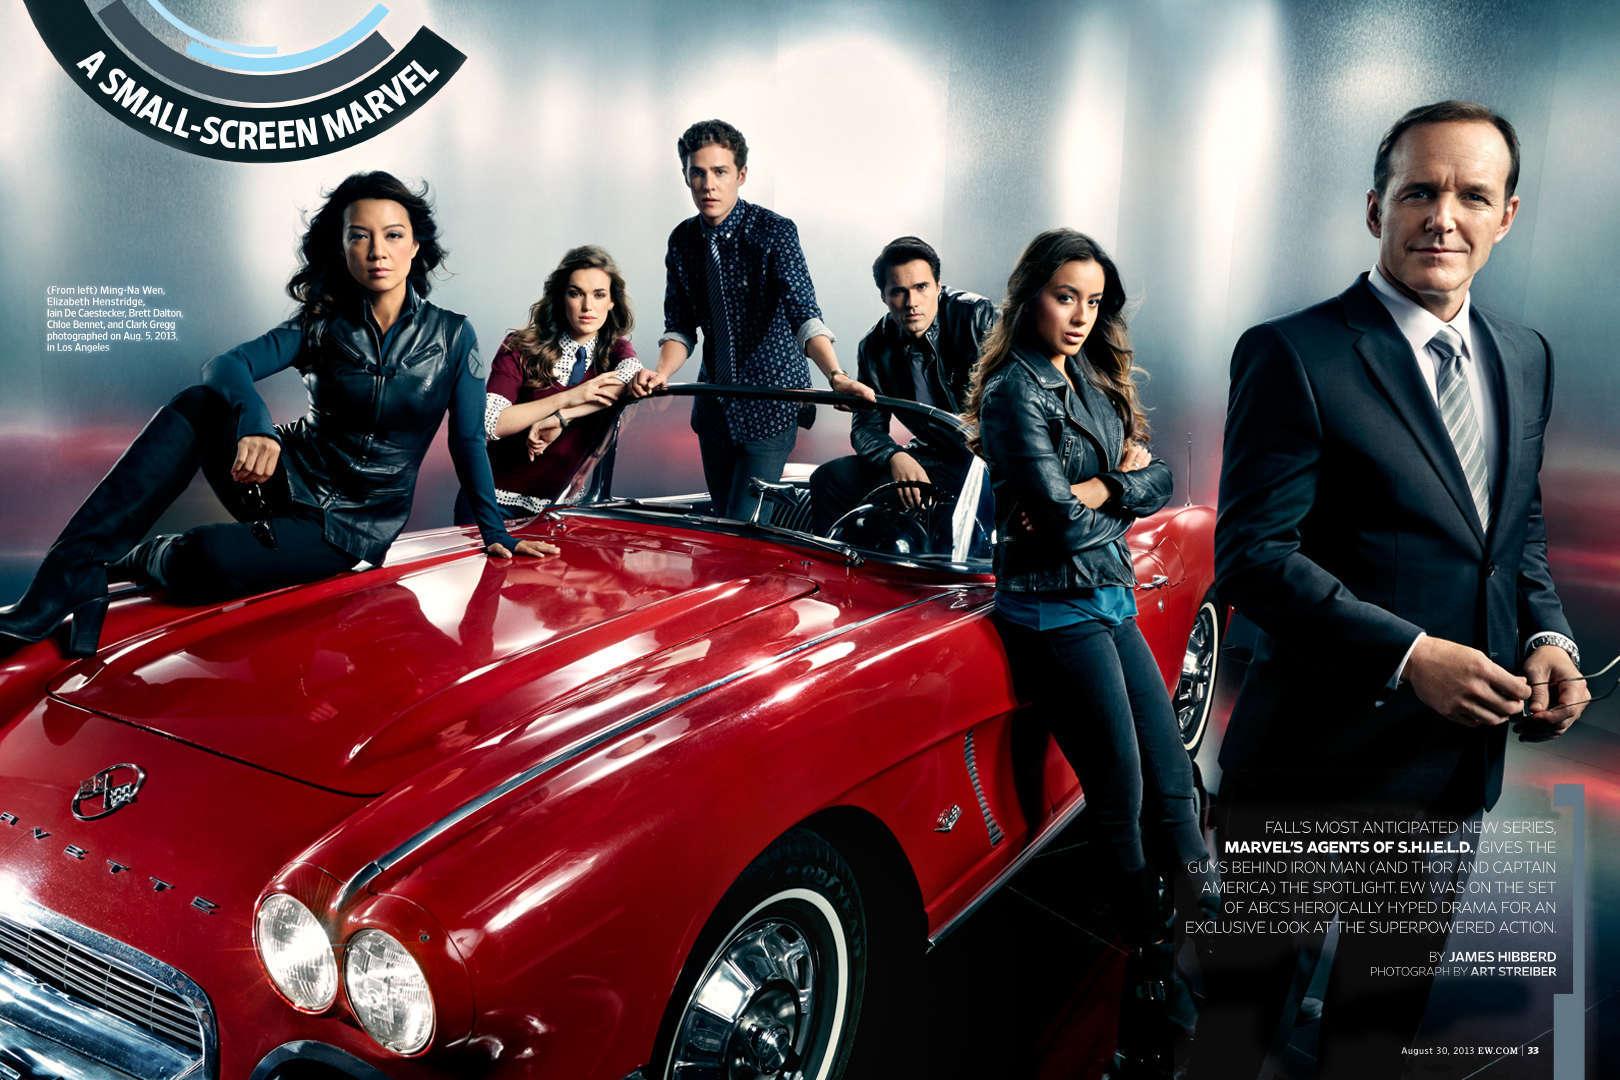 Collection of Agents Of Shield Wallpaper on HDWallpaper